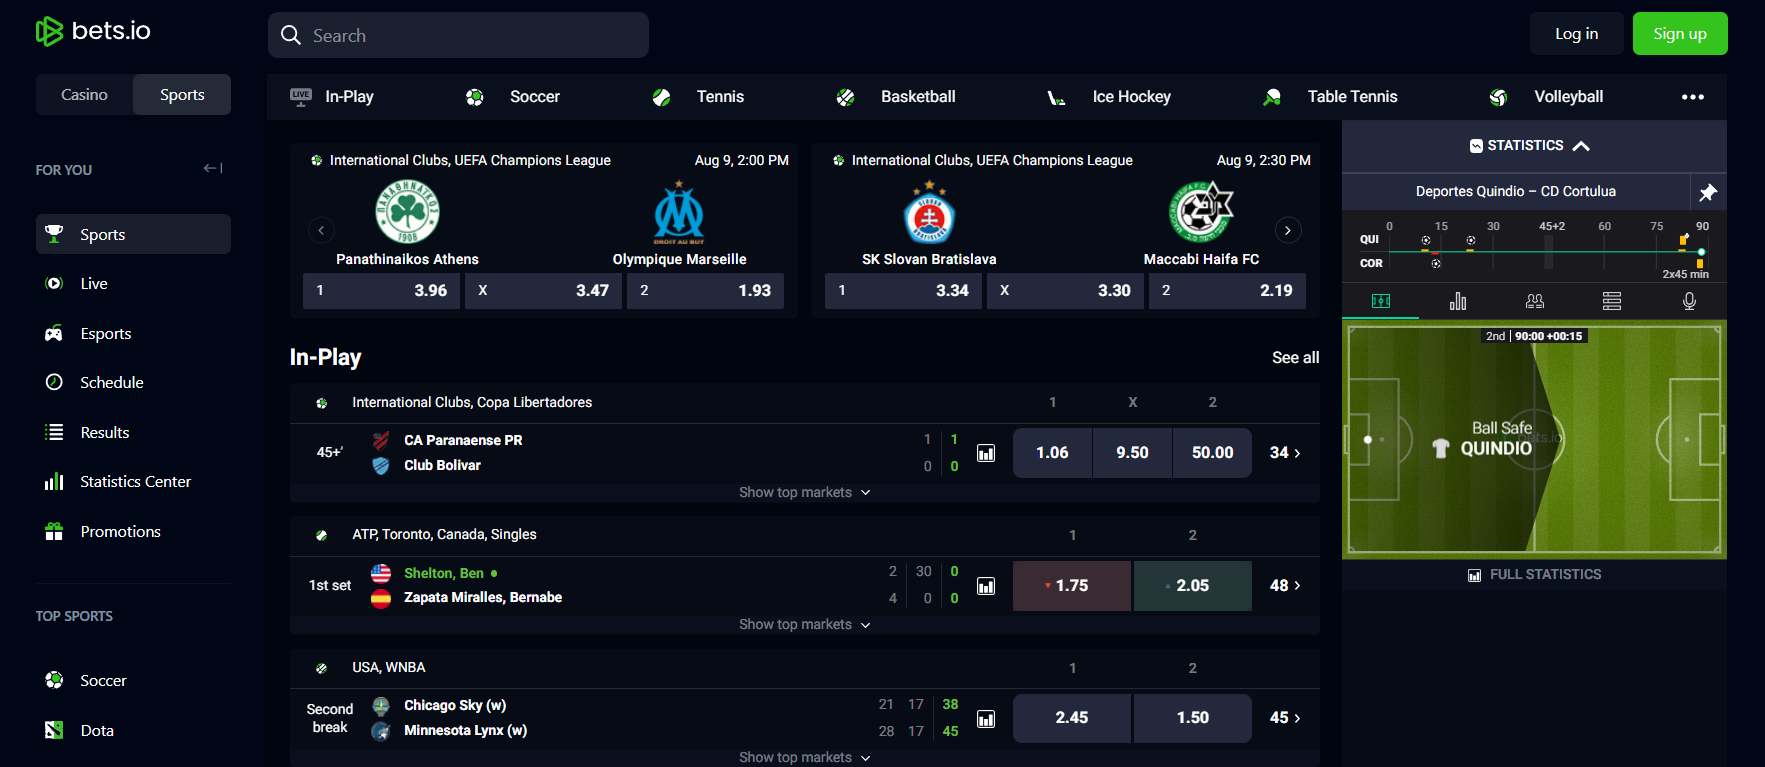 bets.io bookmaker